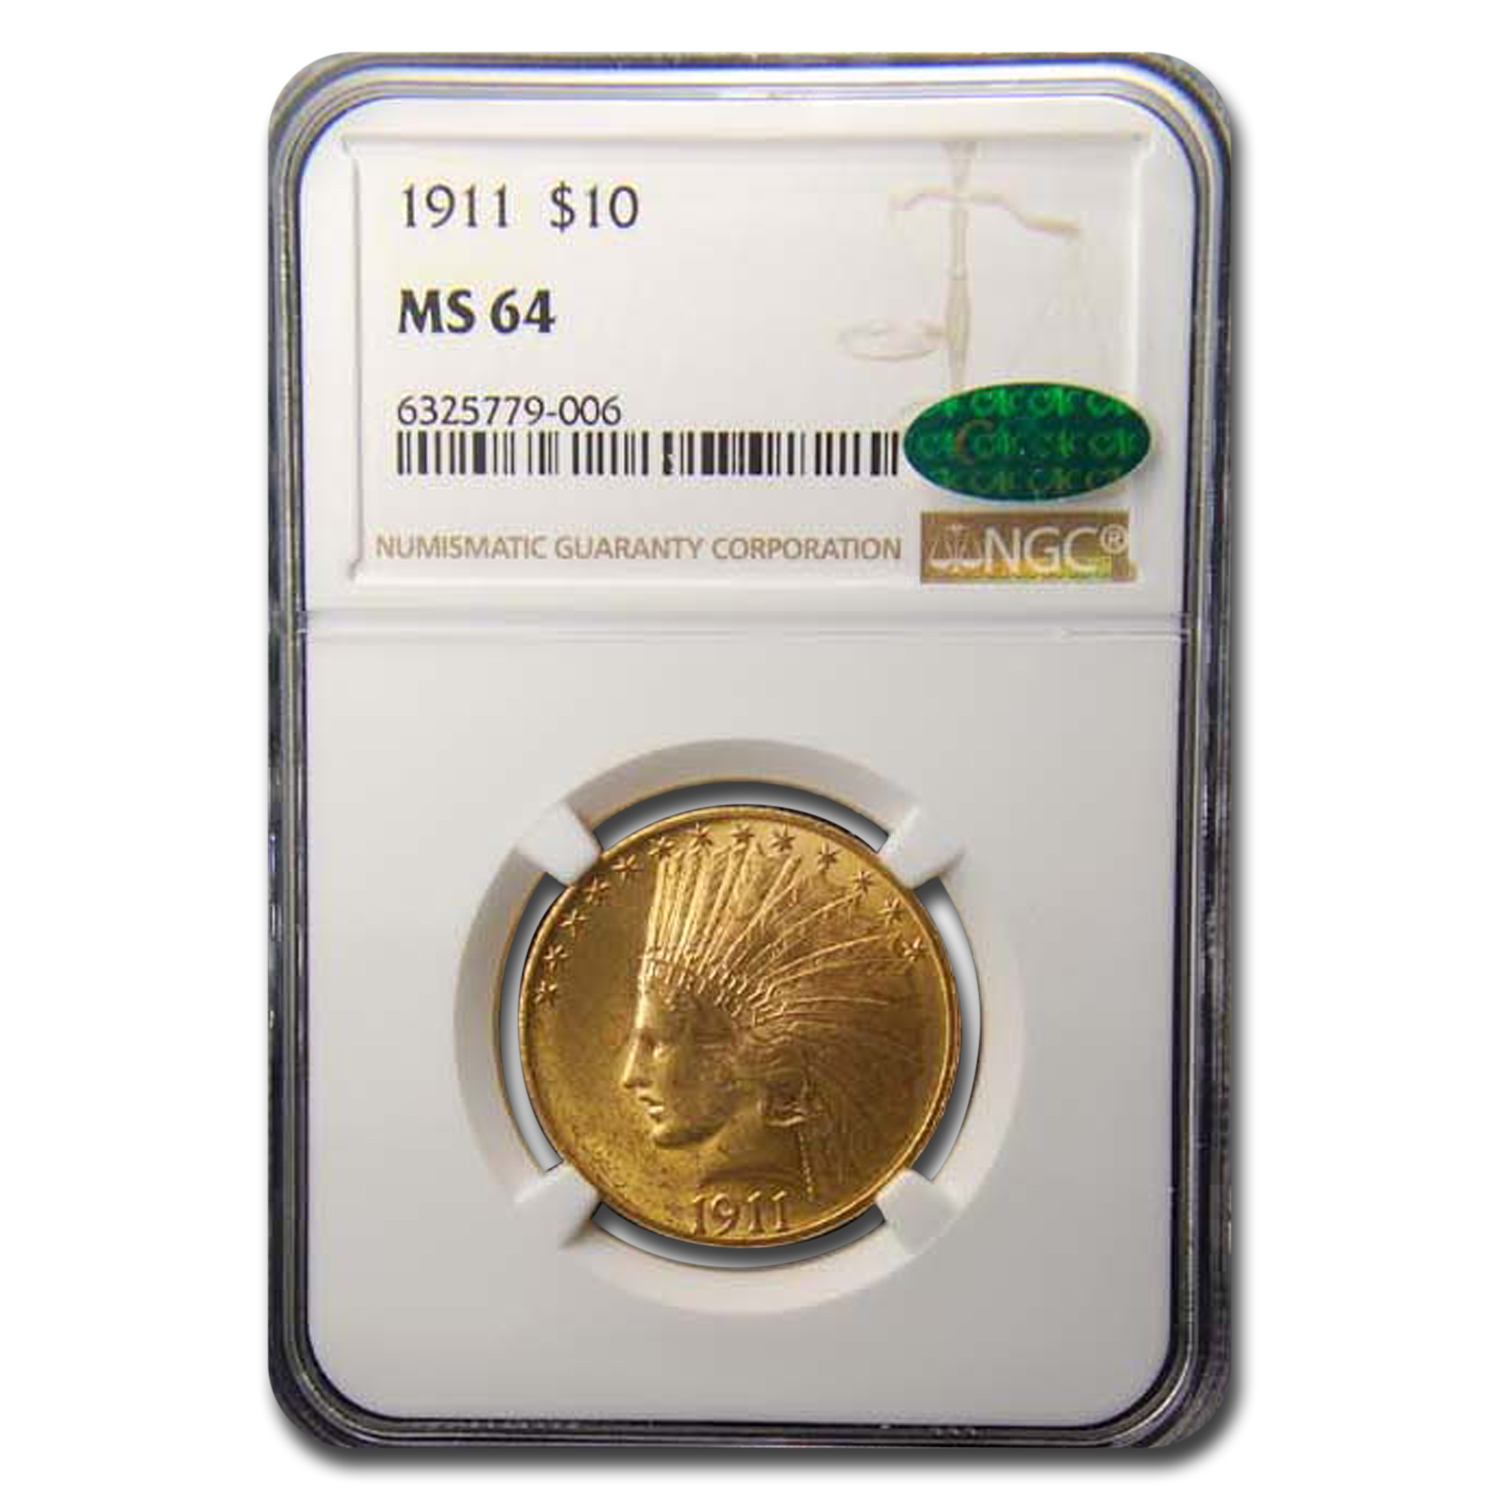 Buy 1911 $10 Indian Gold Eagle MS-64 NGC CAC